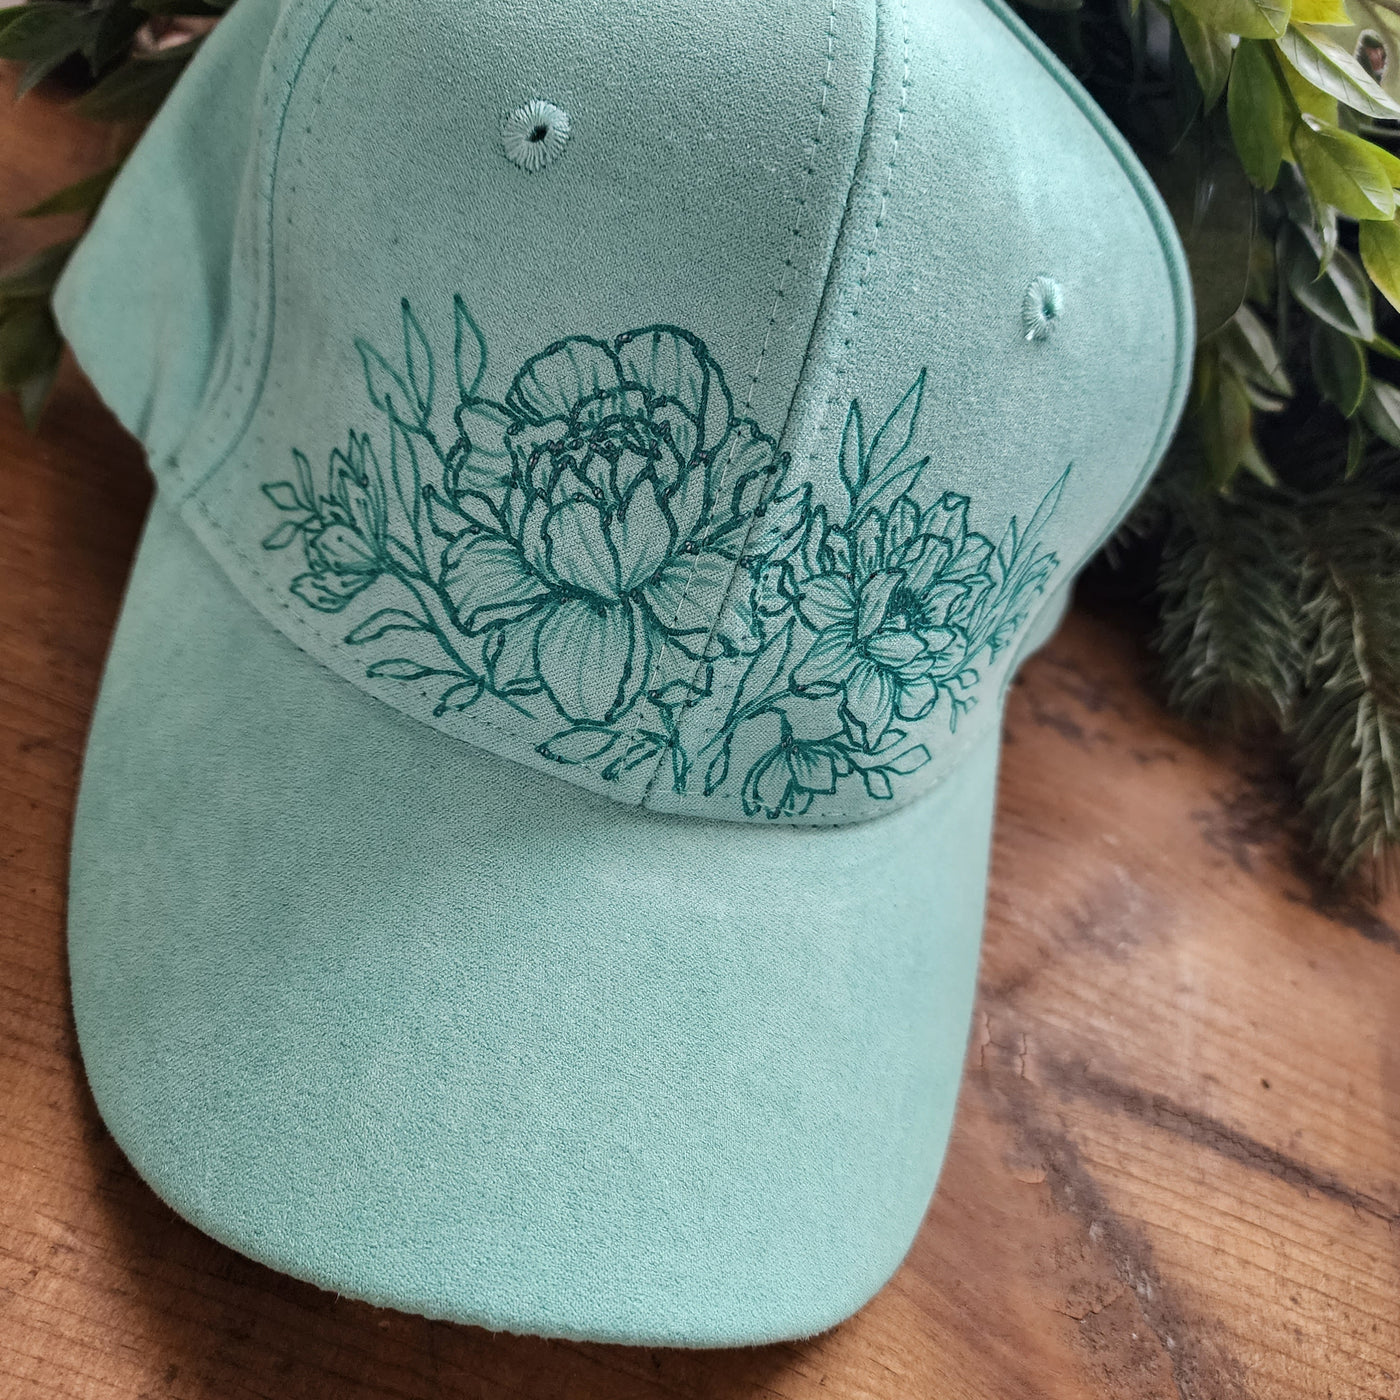 Magnolia Bunch || Dark Mint Baseball Style Suede Hat || Freehand Designed